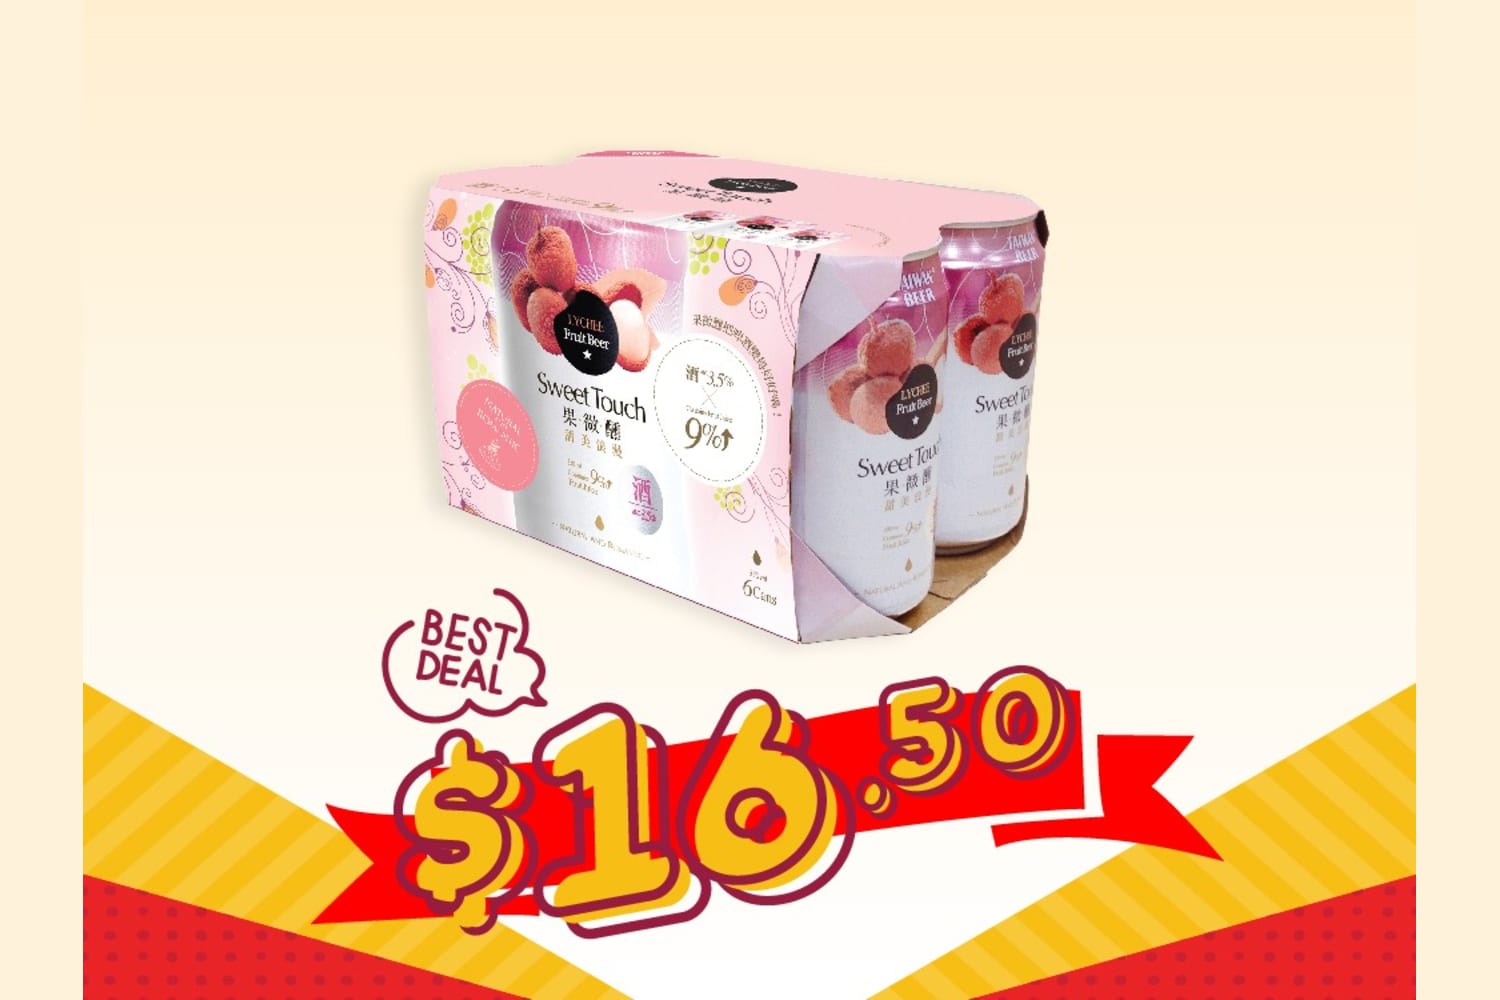 1 x TTL Lychee Beer (6 x 330 ml) - limited stock at OleOle Singapore Confectionery & Liquor - Get Deals, Cashback and Rewards with ShopBack GO